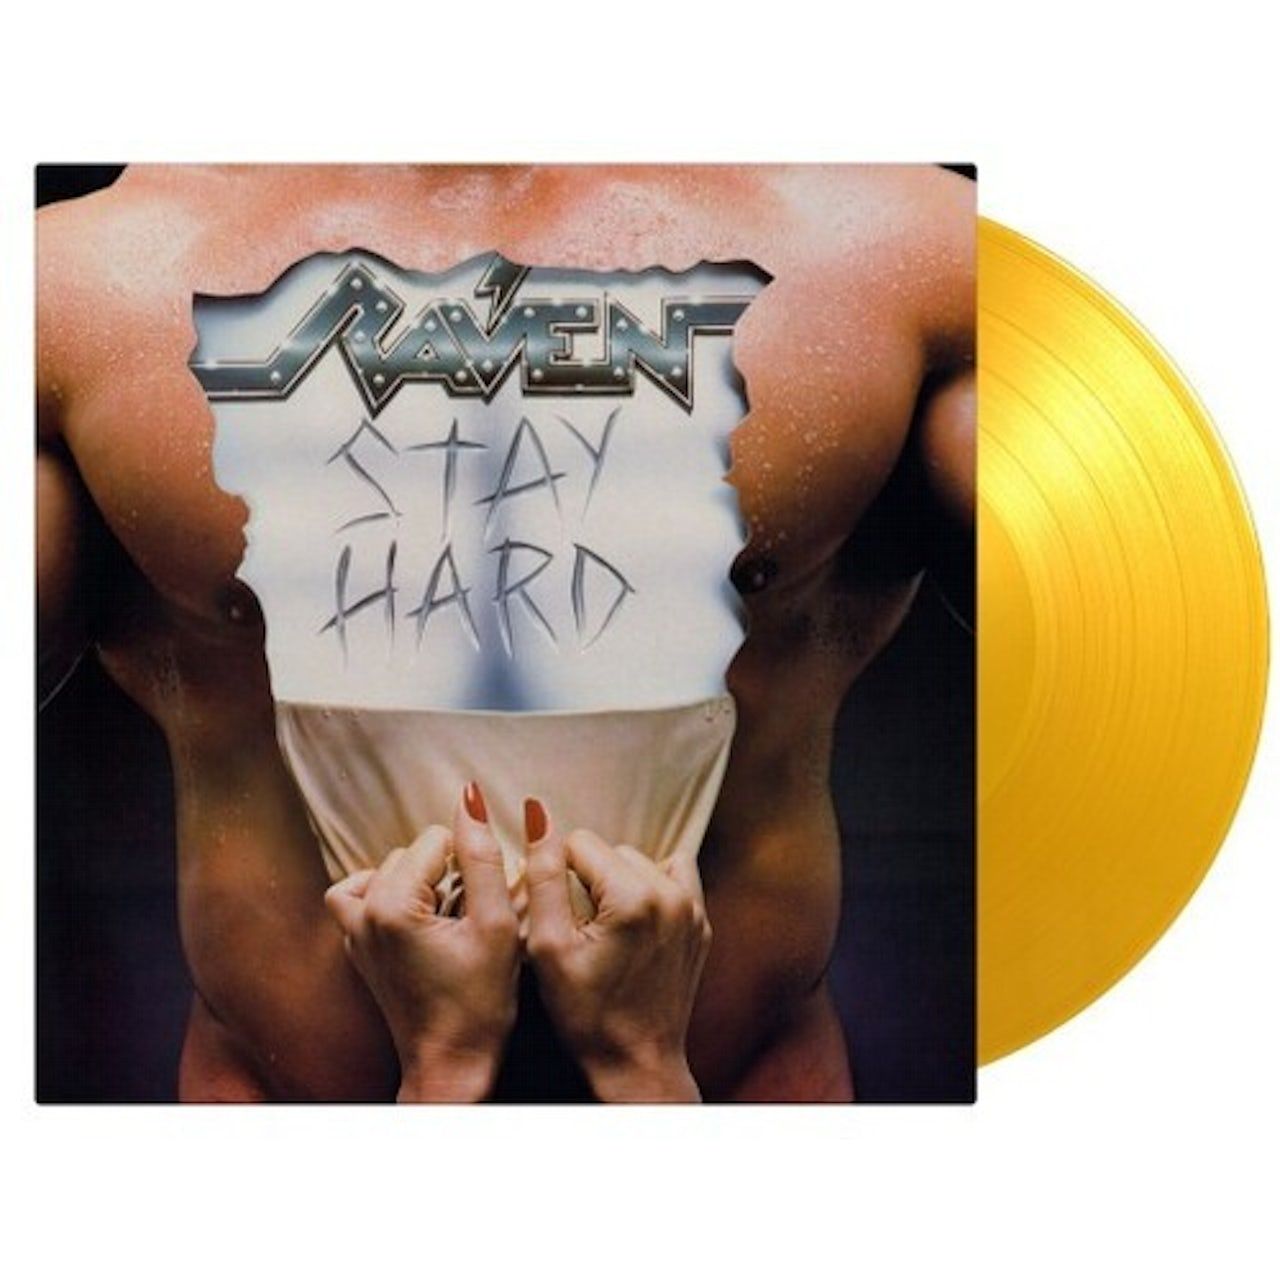 8719262026940, Виниловая пластинка Raven, Stay Hard (coloured) виниловые пластинки music on vinyl rca bow wow wow when the going gets tough the tough get going lp coloured